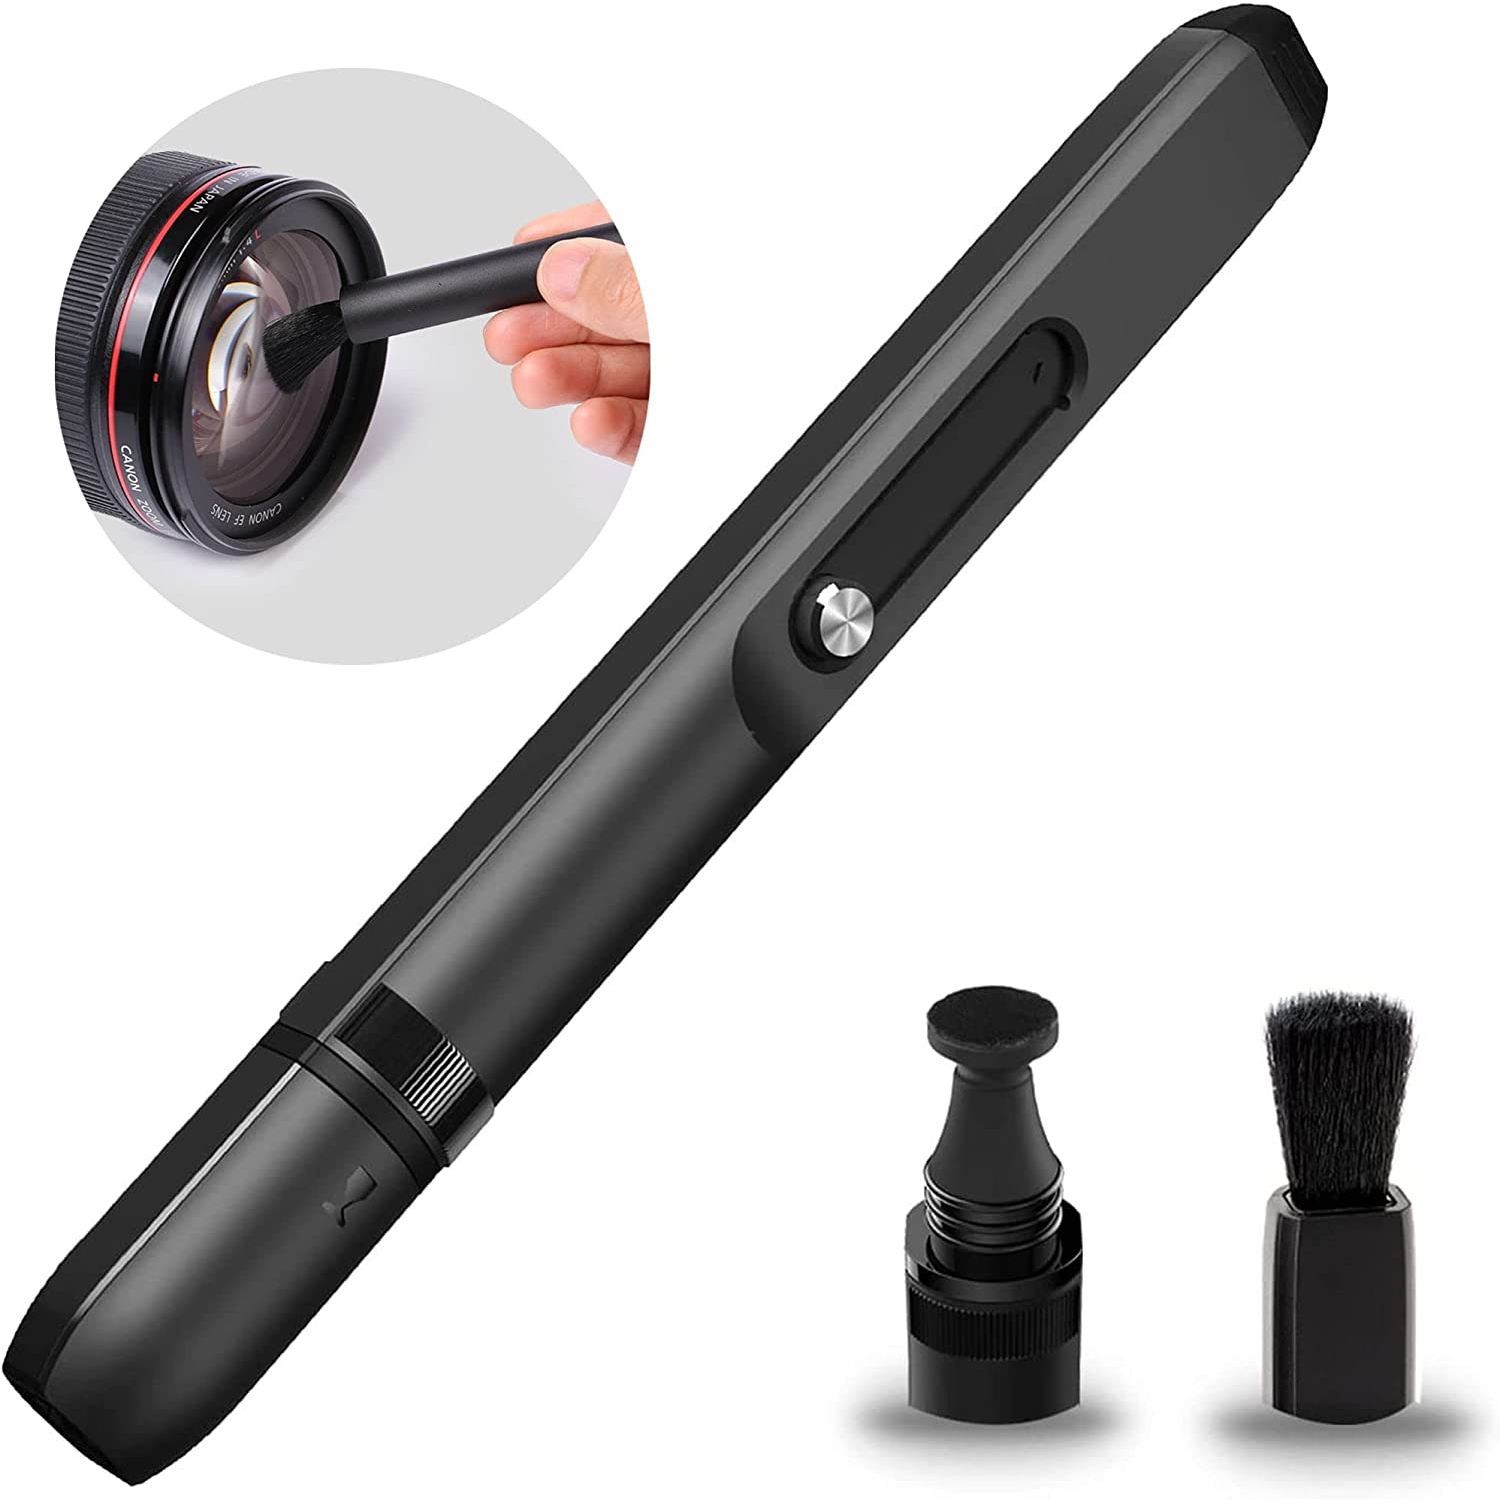 Vsgo V-P01e Professional Lens Cleaning Pen Lens Brush Double-Ended Lens Pen With Soft Brush And Nano Optical Carbon Compatible For Camera Lens Cleaning, Optical Lens, Glasses ,